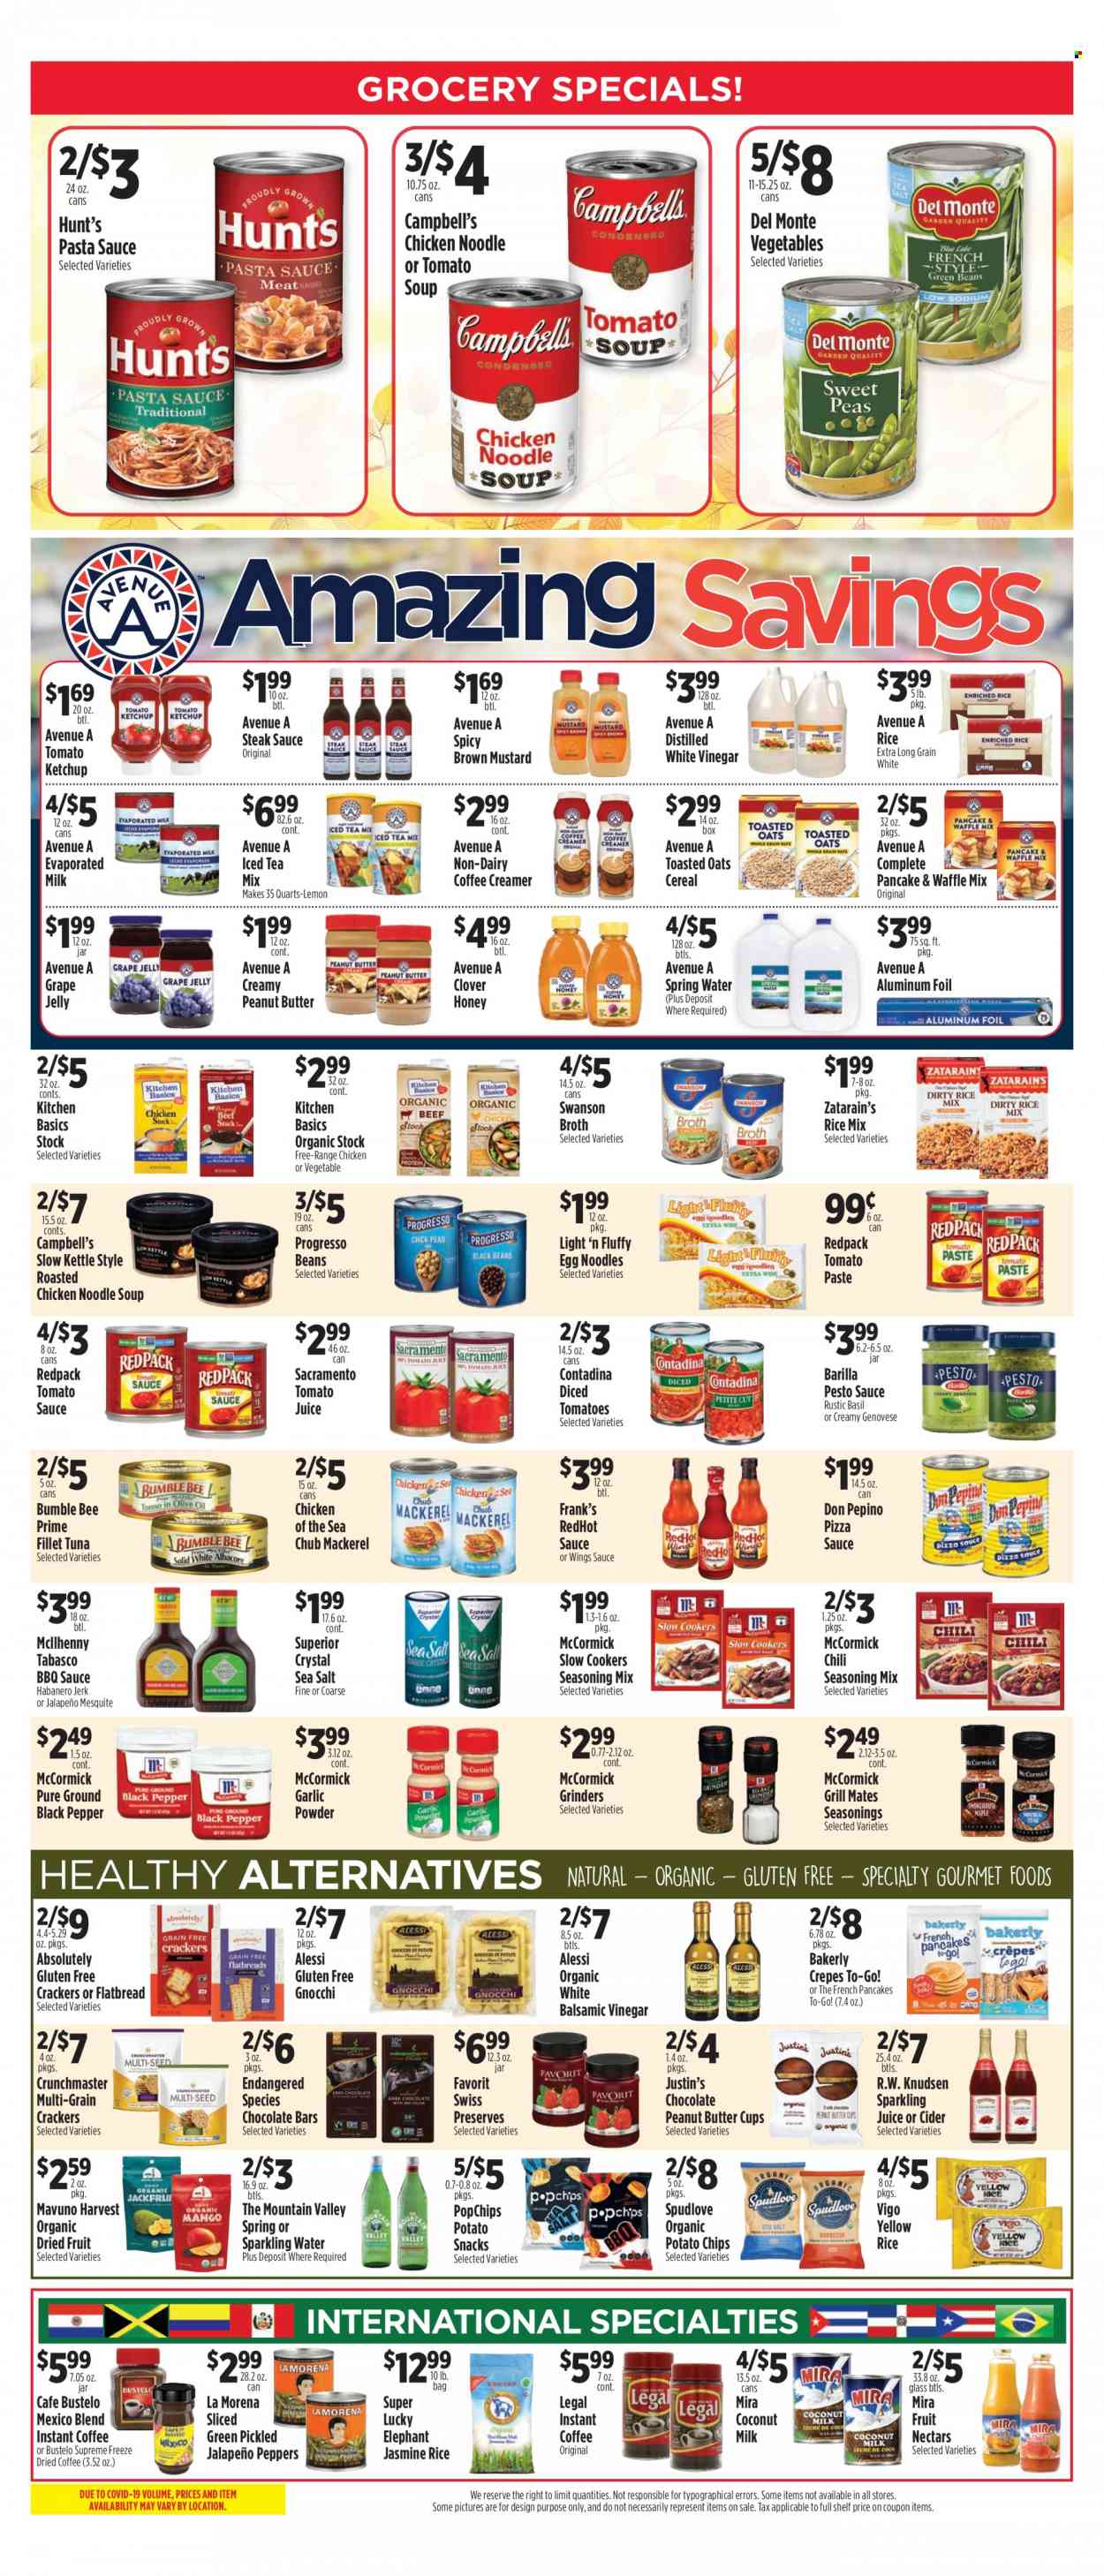 thumbnail - Pioneer Supermarkets Flyer - 09/25/2022 - 10/01/2022 - Sales products - flatbread, mackerel, tuna, Campbell's, gnocchi, tomato soup, chicken roast, pasta sauce, soup, Bumble Bee, sauce, pancakes, noodles cup, Barilla, noodles, Progresso, evaporated milk, creamer, snack, jelly, crackers, peanut butter cups, chocolate bar, potato chips, chips, tabasco, broth, coconut milk, tomato paste, tomato sauce, Chicken of the Sea, diced tomatoes, Del Monte, cereals, toasted oats, jasmine rice, egg noodles, spice, garlic powder, BBQ sauce, mustard, steak sauce, ketchup, pesto, balsamic vinegar, grape jelly, honey, dried fruit, tomato juice, juice, ice tea, sparkling juice, spring water, sparkling water, instant coffee, cider, steak. Page 2.